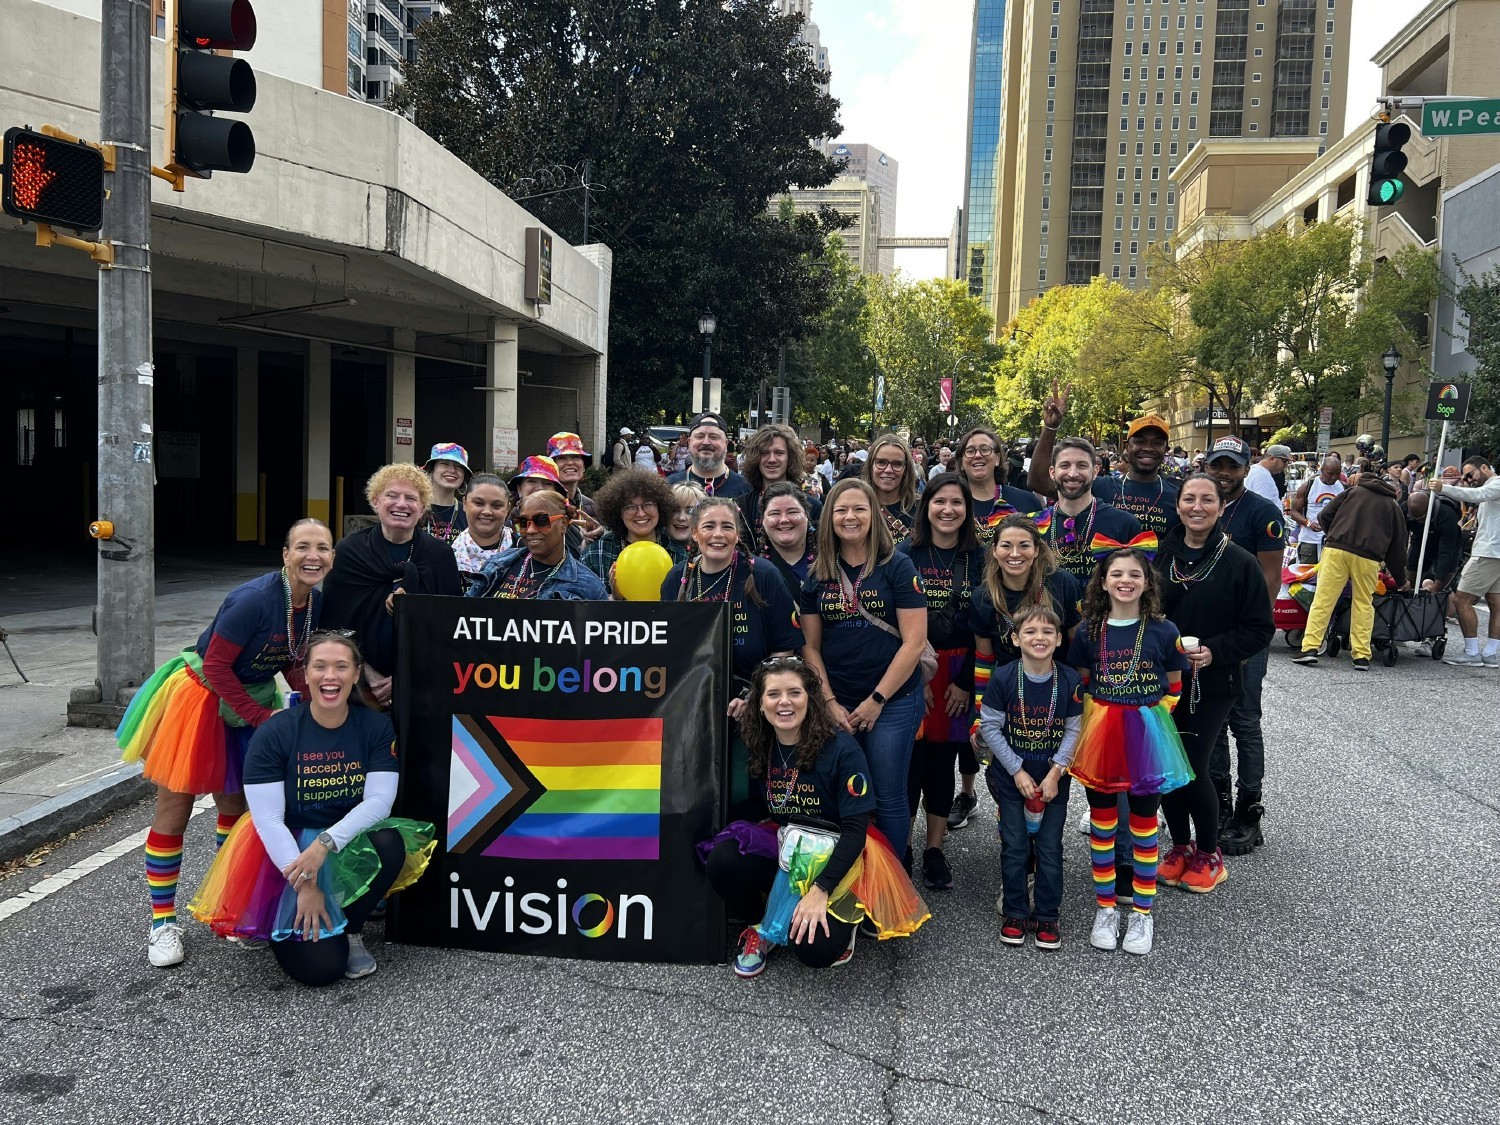 Team members represent ivision at the Atlanta Pride parade to share a message of belonging to the community.